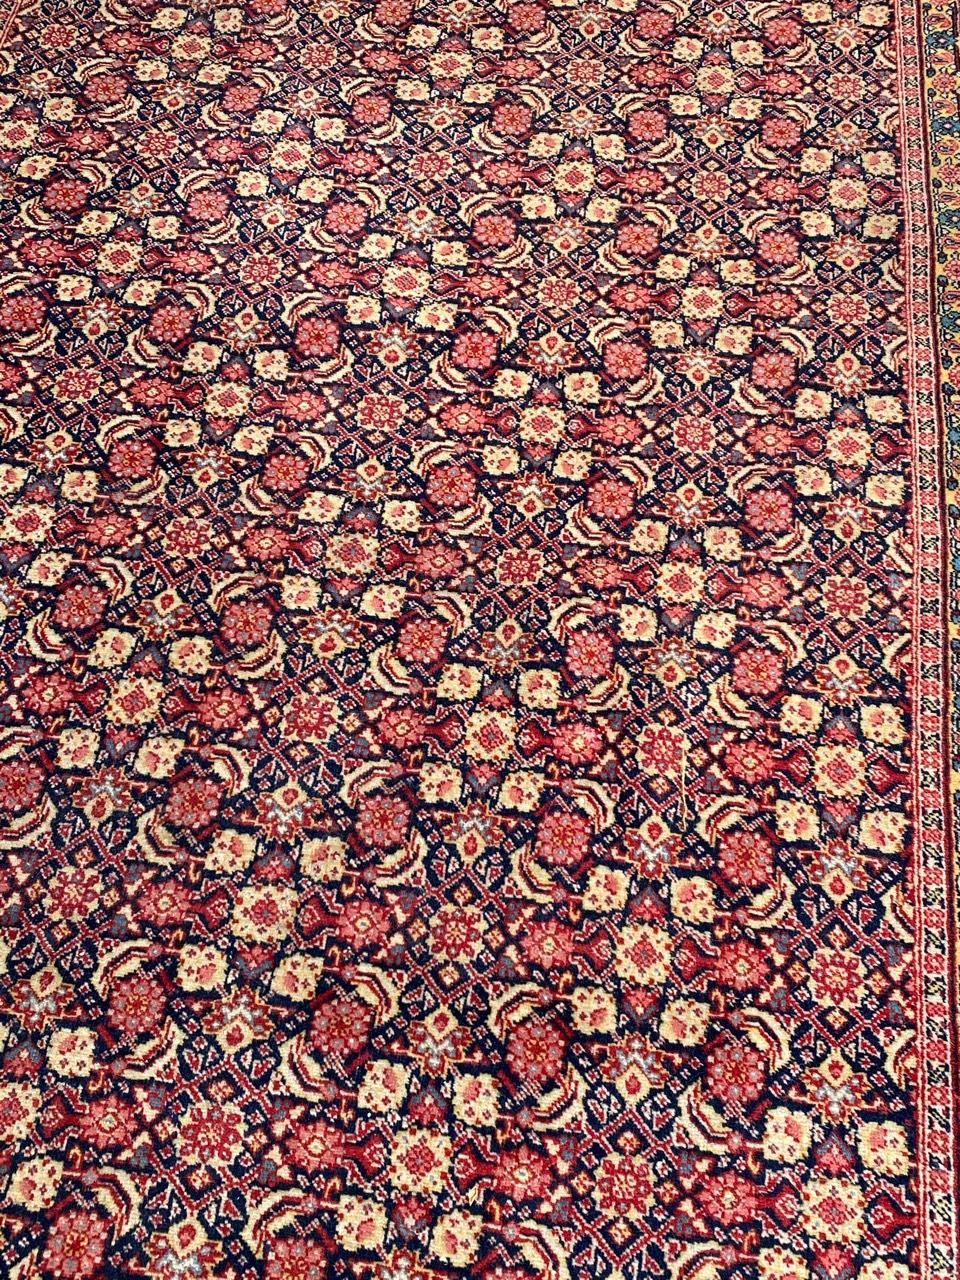 Beautiful early 20th century rug with a Herati design and beautiful colors with blue, red, yellow, orange and pink, entirely and finely hand knotted with wool velvet on cotton foundation.

✨✨✨
